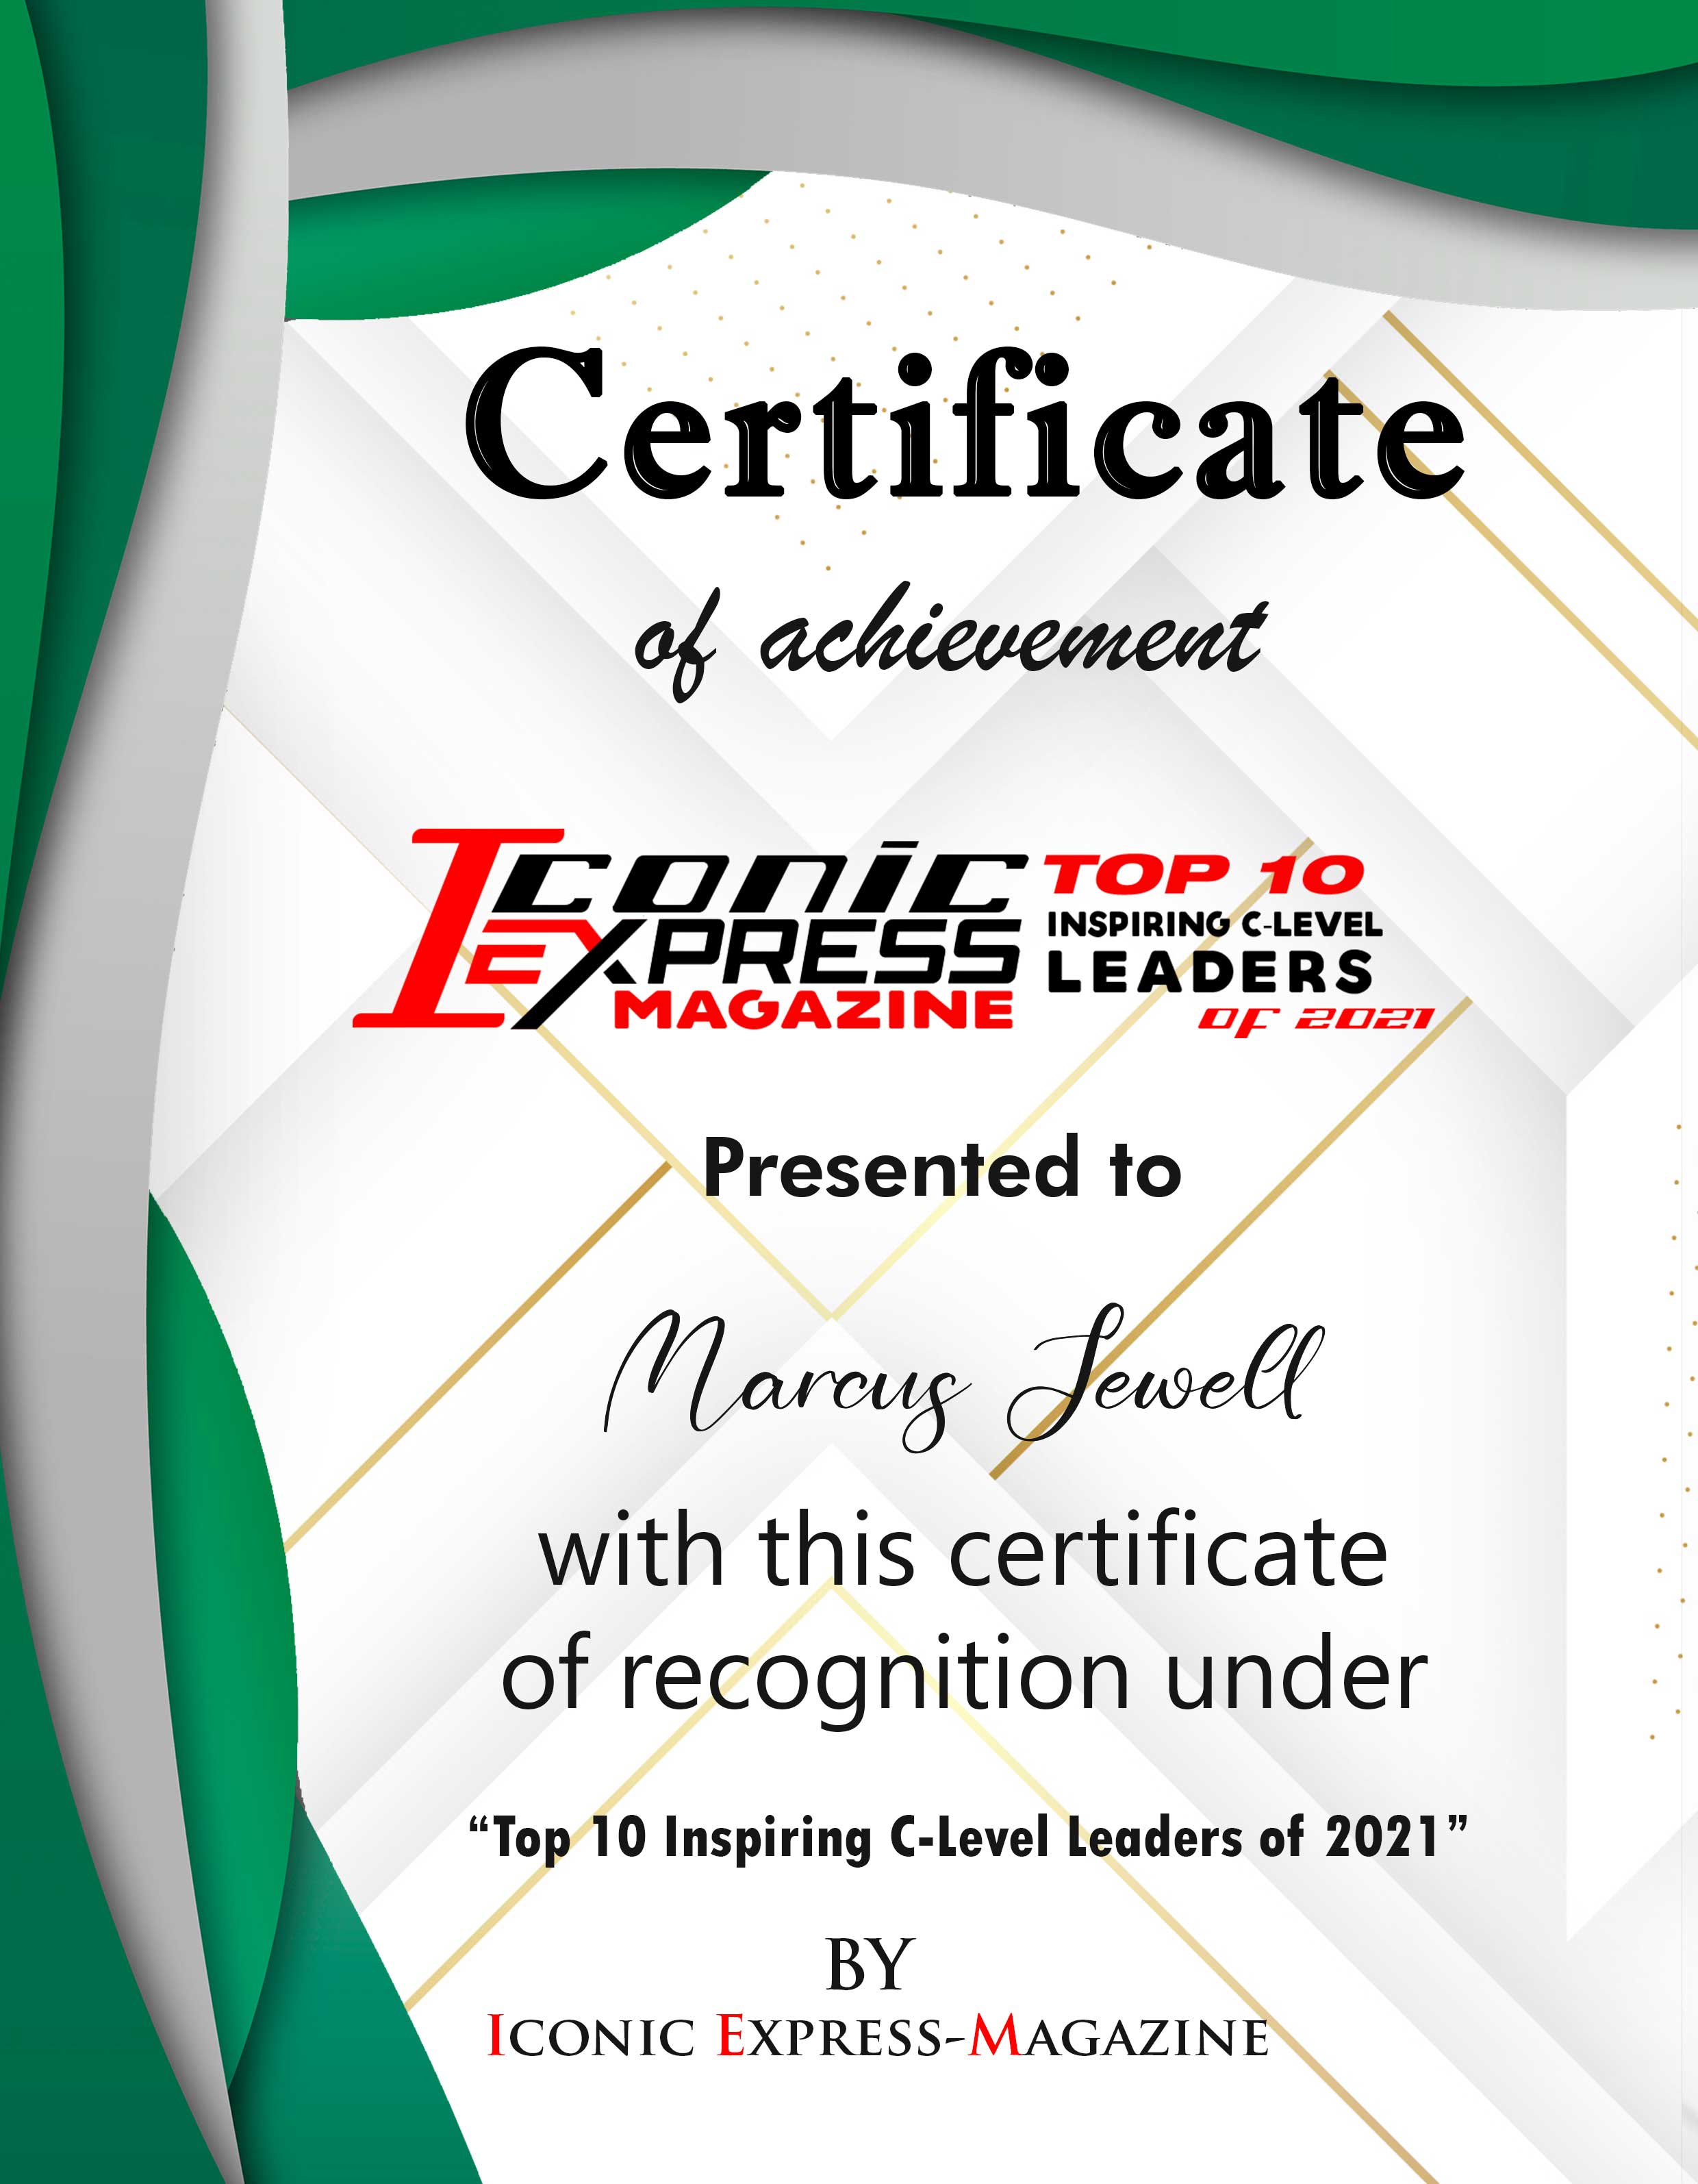 Marcus Jewell, Chief Revenue Officer of Juniper Networks, Certificate